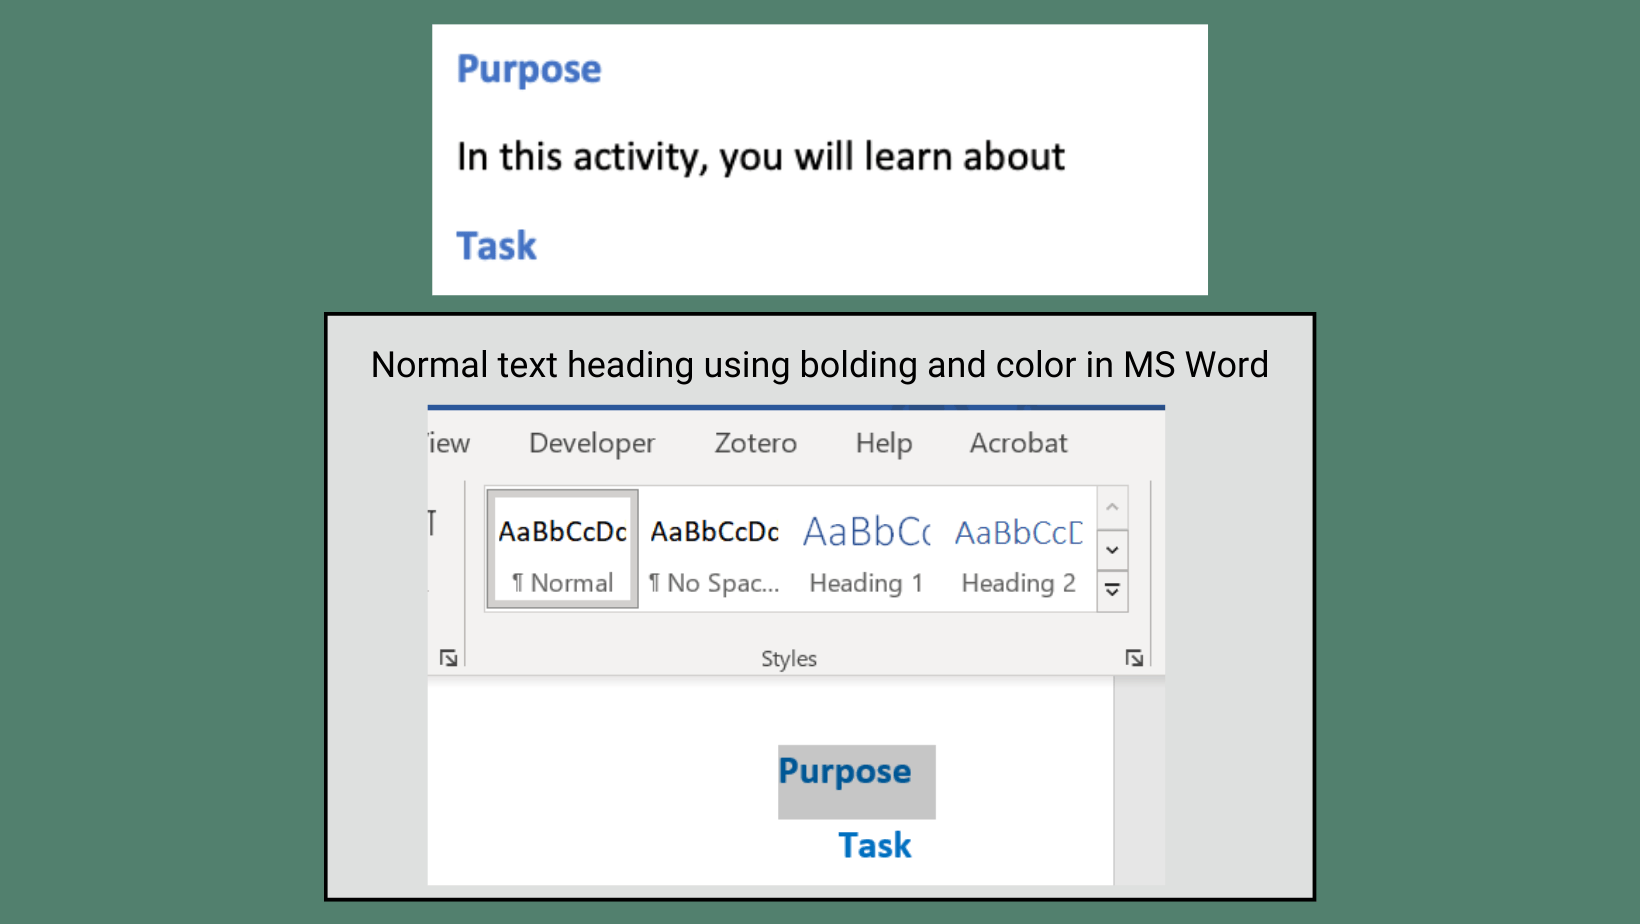 Image containing two screenshots. The first screenshot shows a document with the word ‘Purpose’ emphasized in blue and bolded text. Below ‘Purpose’ is plain black text that reads, ‘In this activity, you will learn about.’ The document ends with the word ‘Task’ also emphasized in blue and bolded text. The second screenshot displays the text style pane in Microsoft Word. It indicates that the text in the screenshot is formatted with the ‘Normal’ text style.